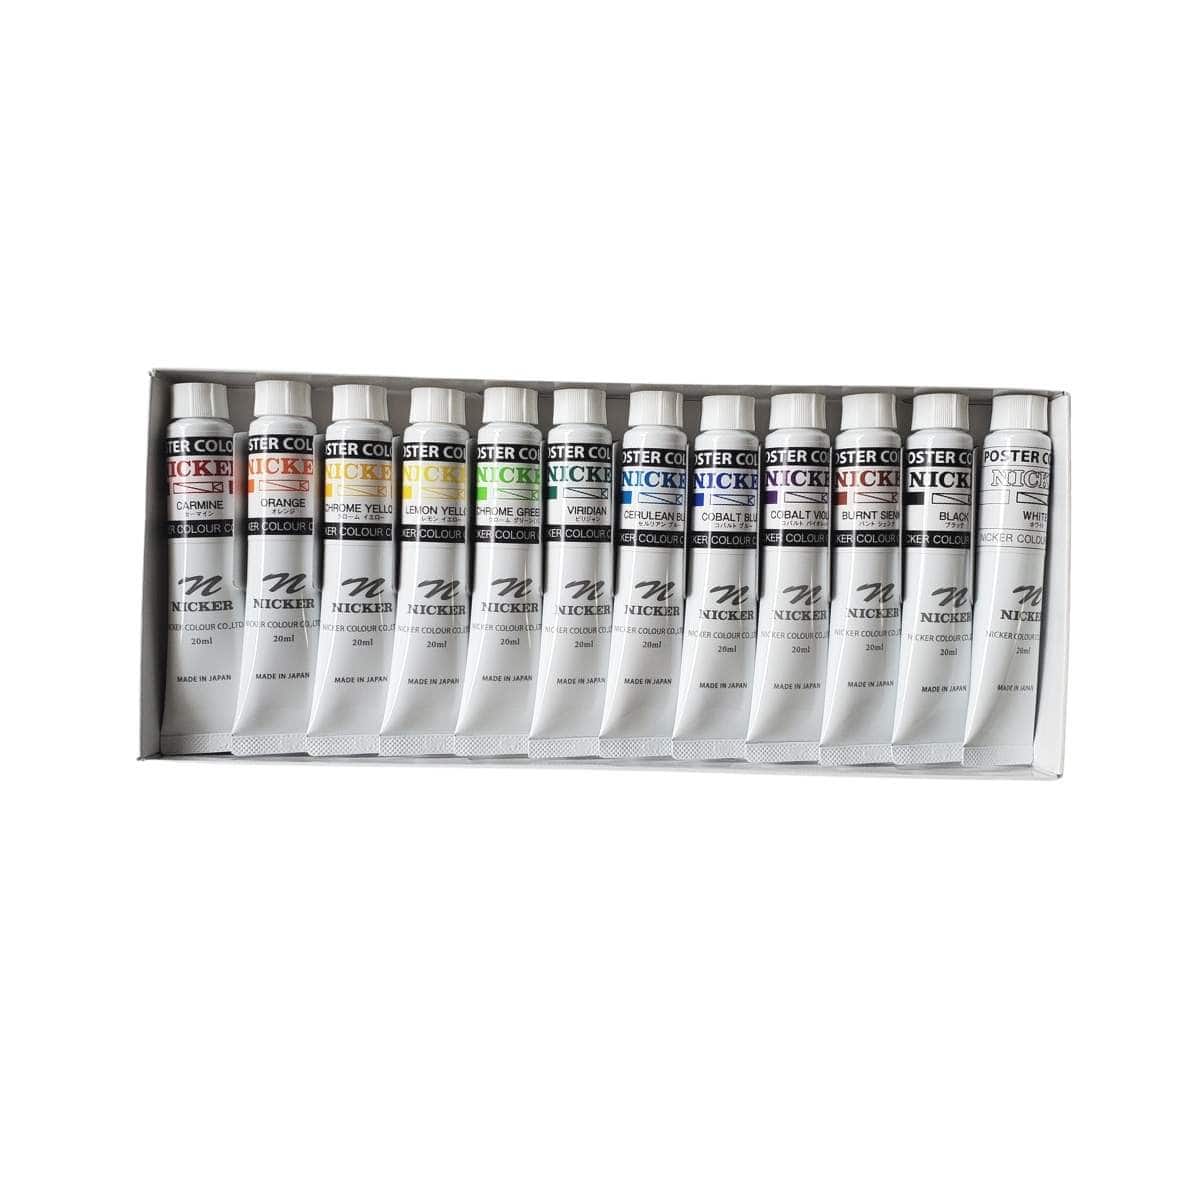 Nicker Poster Color 12 colors 40ml PC40ML12N Watercolor paint From Japan